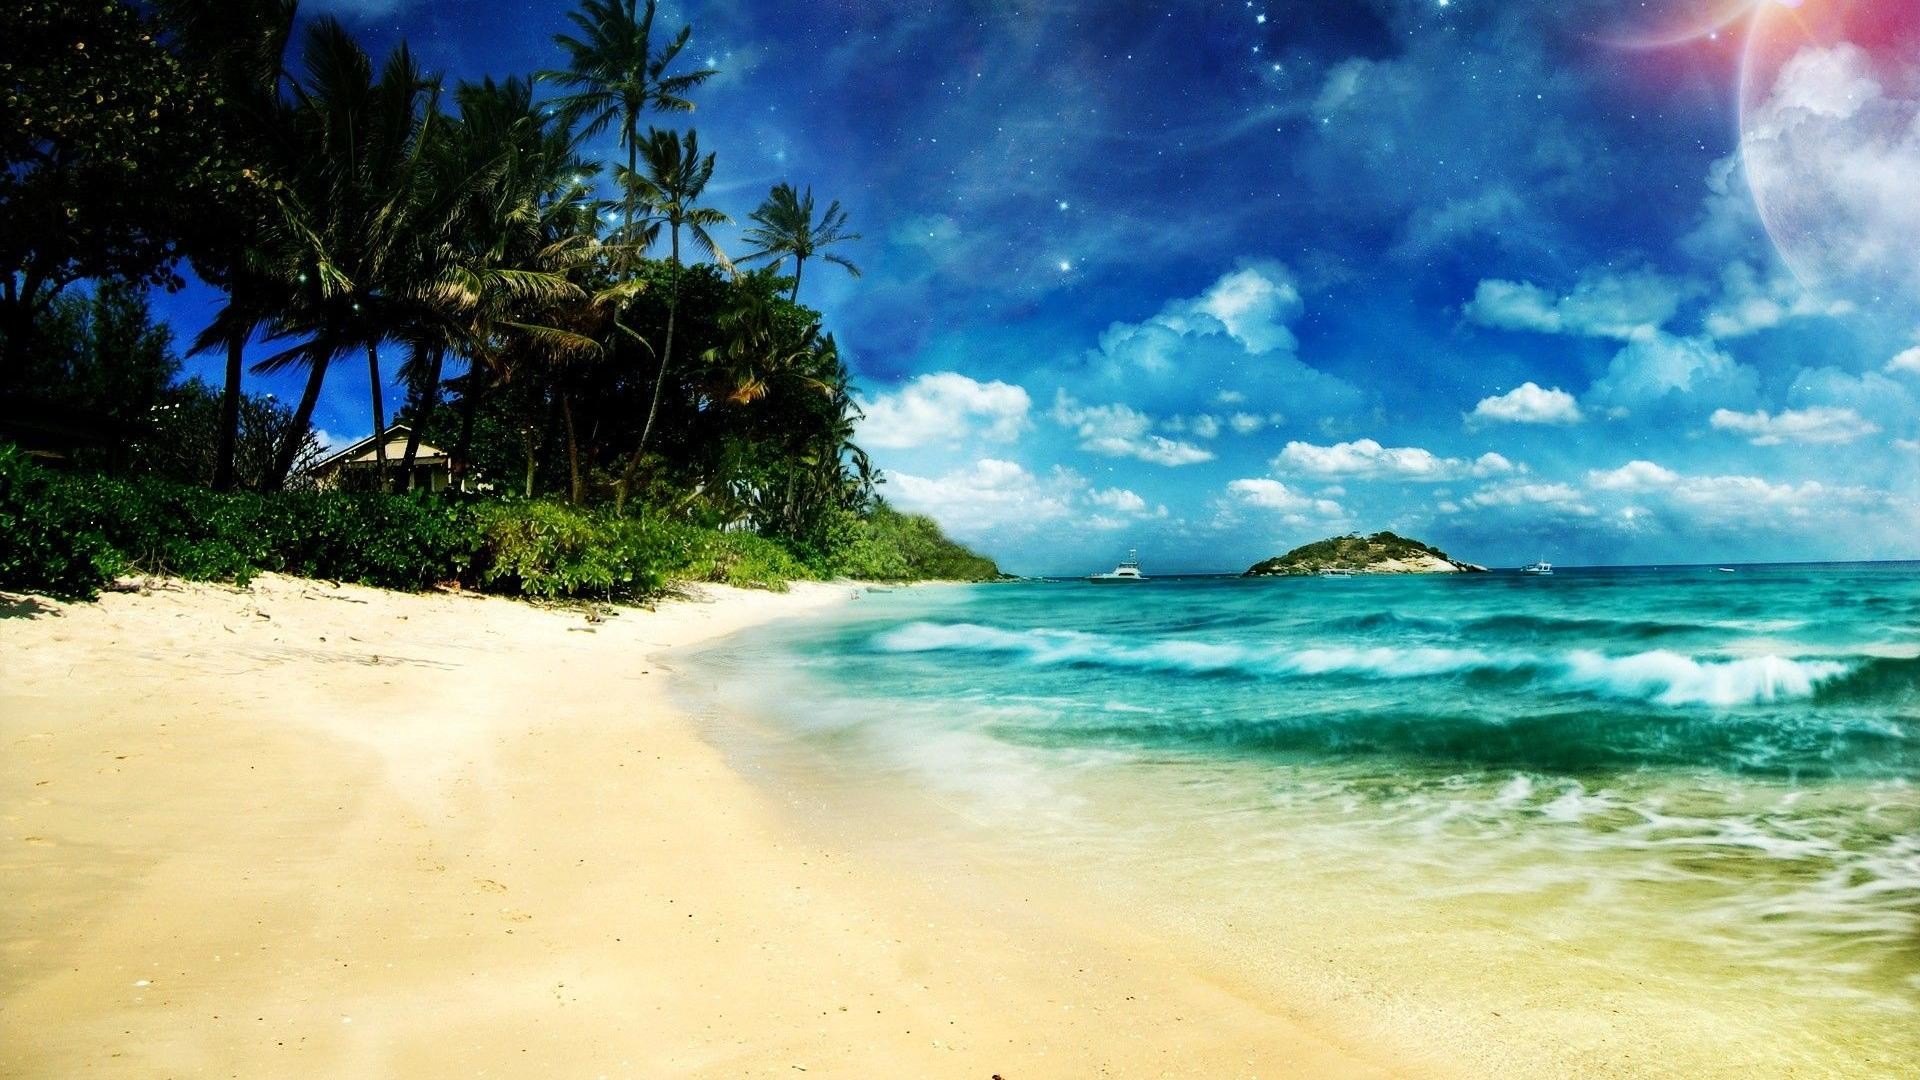 1920x1080 Awesome Beach Backgrounds Group (70+)